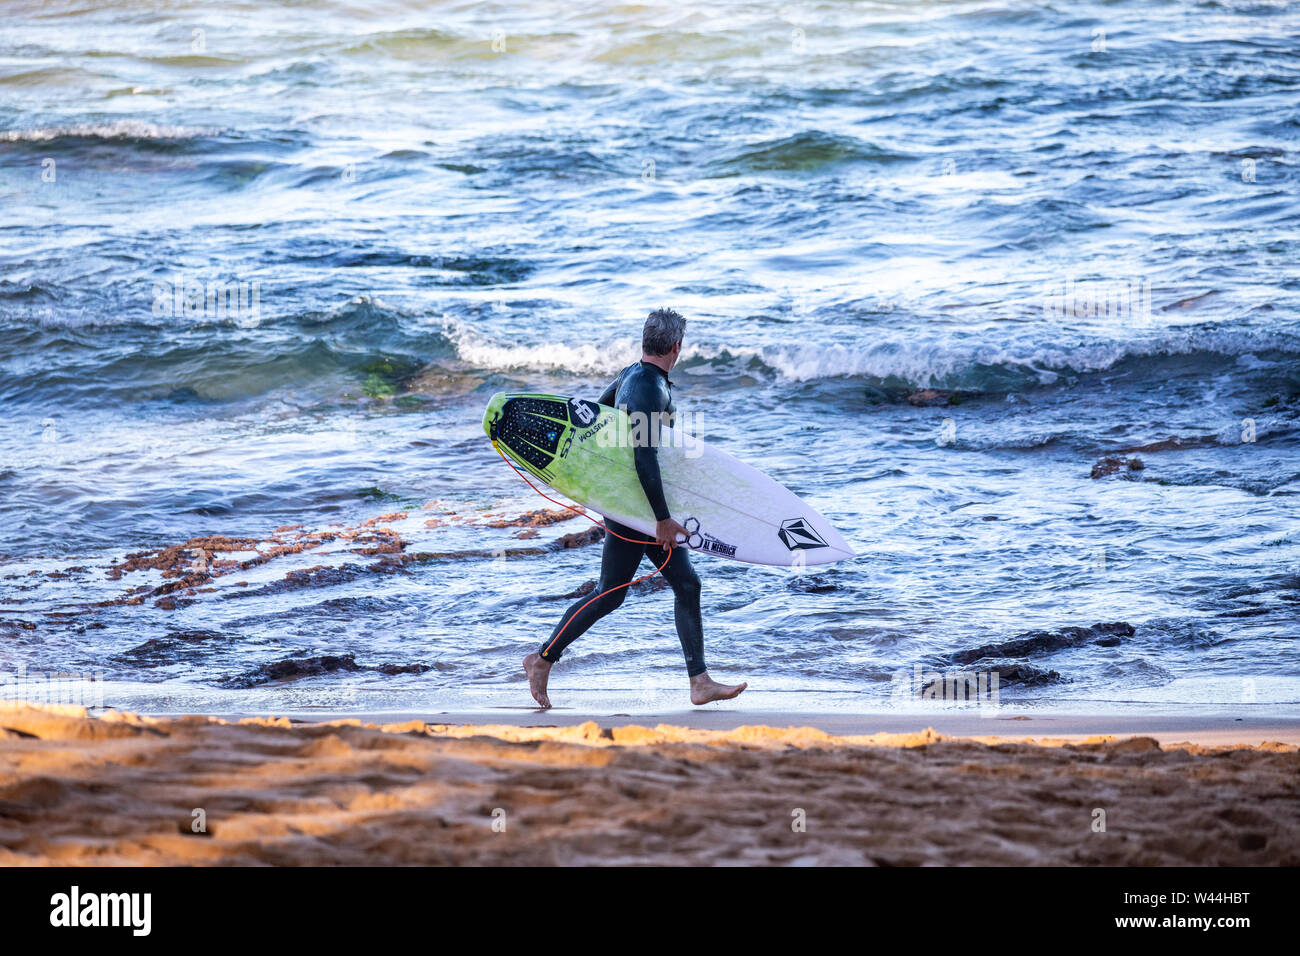 Australian surfers at Avalon beach in Sydney surfing the waves Stock Photo